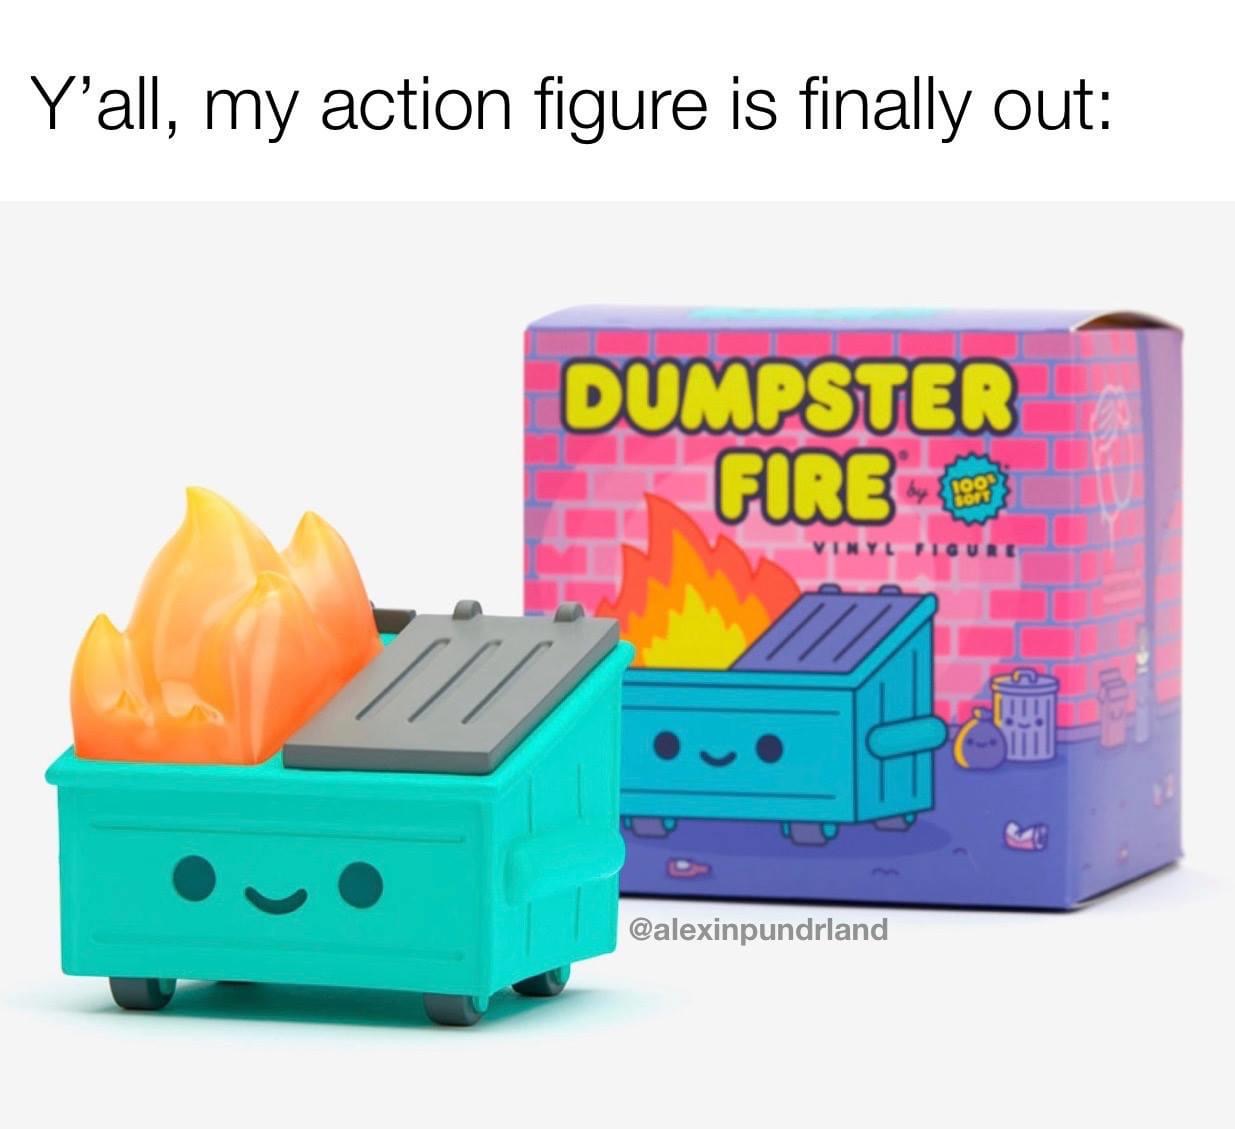 dumpster fire vinyl toy - Y'all, my action figure is finally out Dumpster Fire 100 Soft Viny